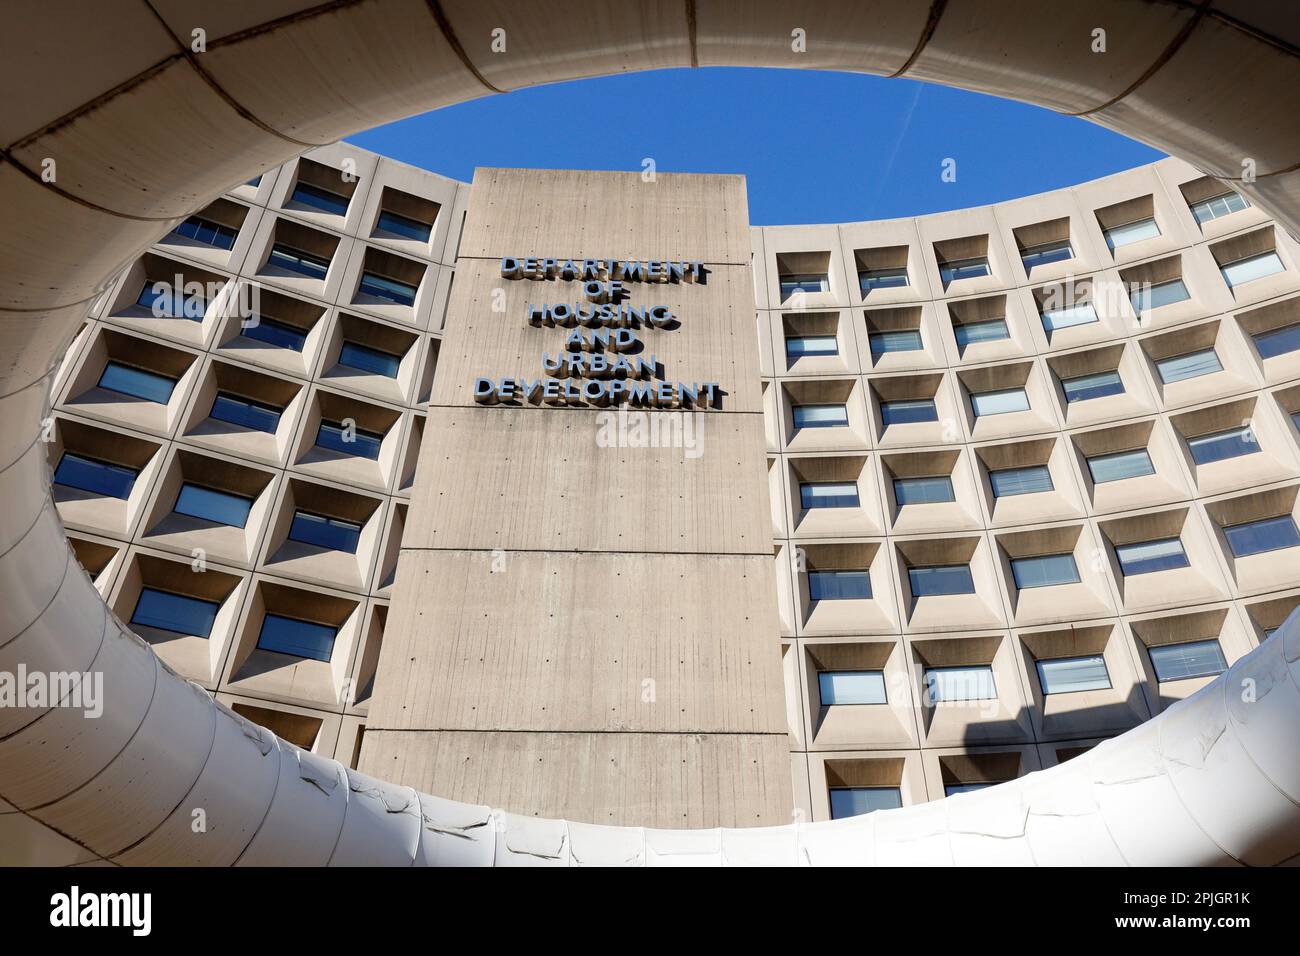 Exterior signage at the U.S. Department of Housing and Urban Development, 451 7th St SW, Washington DC. Stock Photo